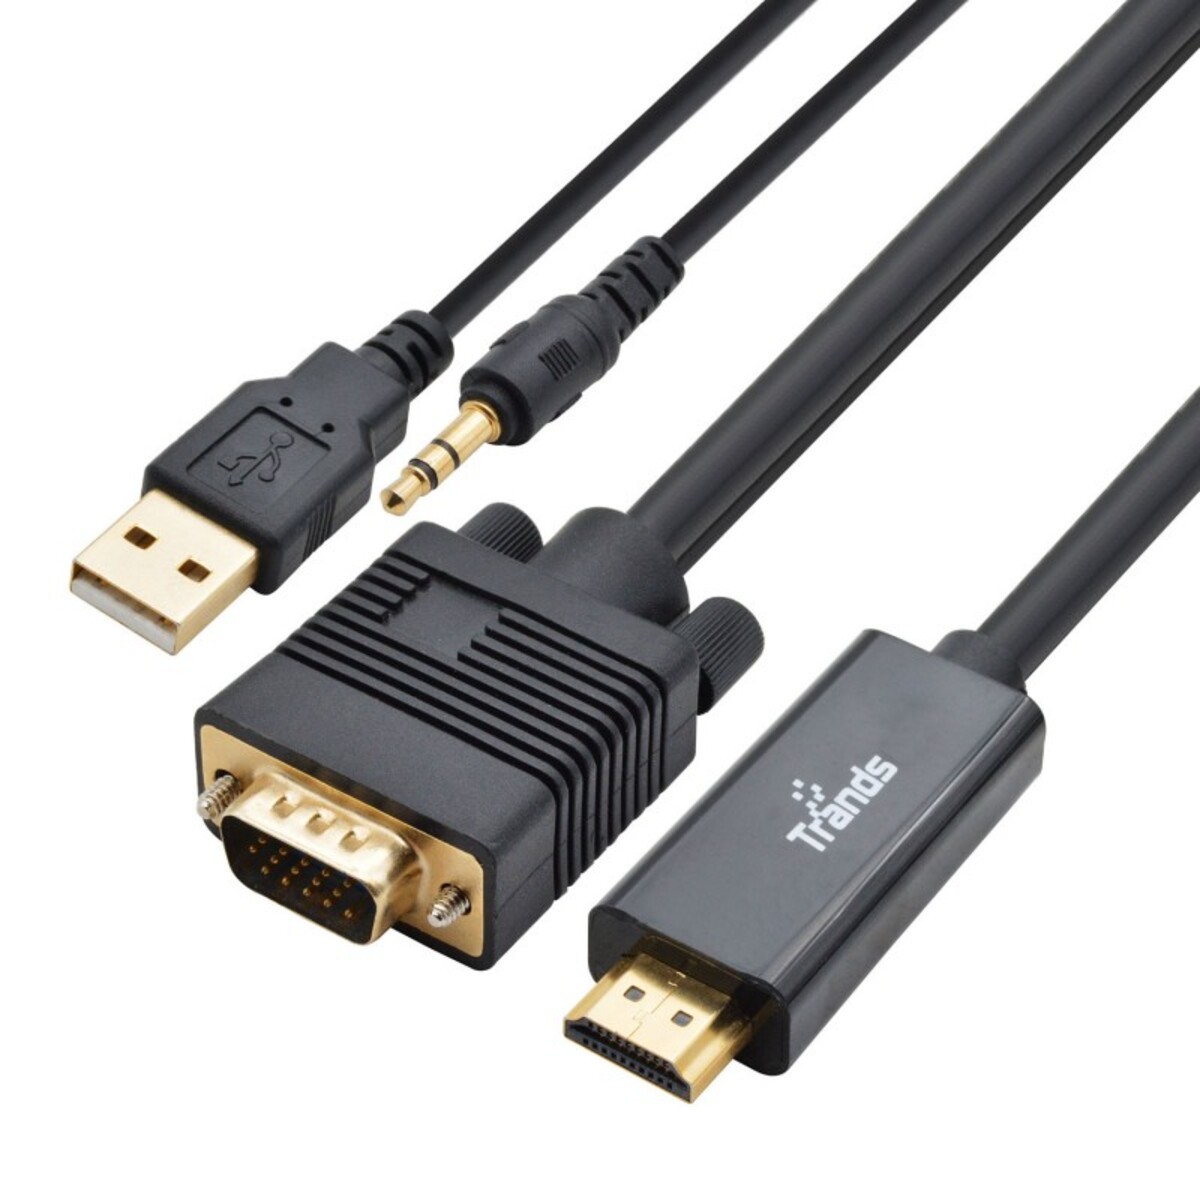 Trands VGA To HDMI Cable With Audio Male to Male, for Computer, Desktop, Laptop, PC, Monitor, Projector, HDTV CA535